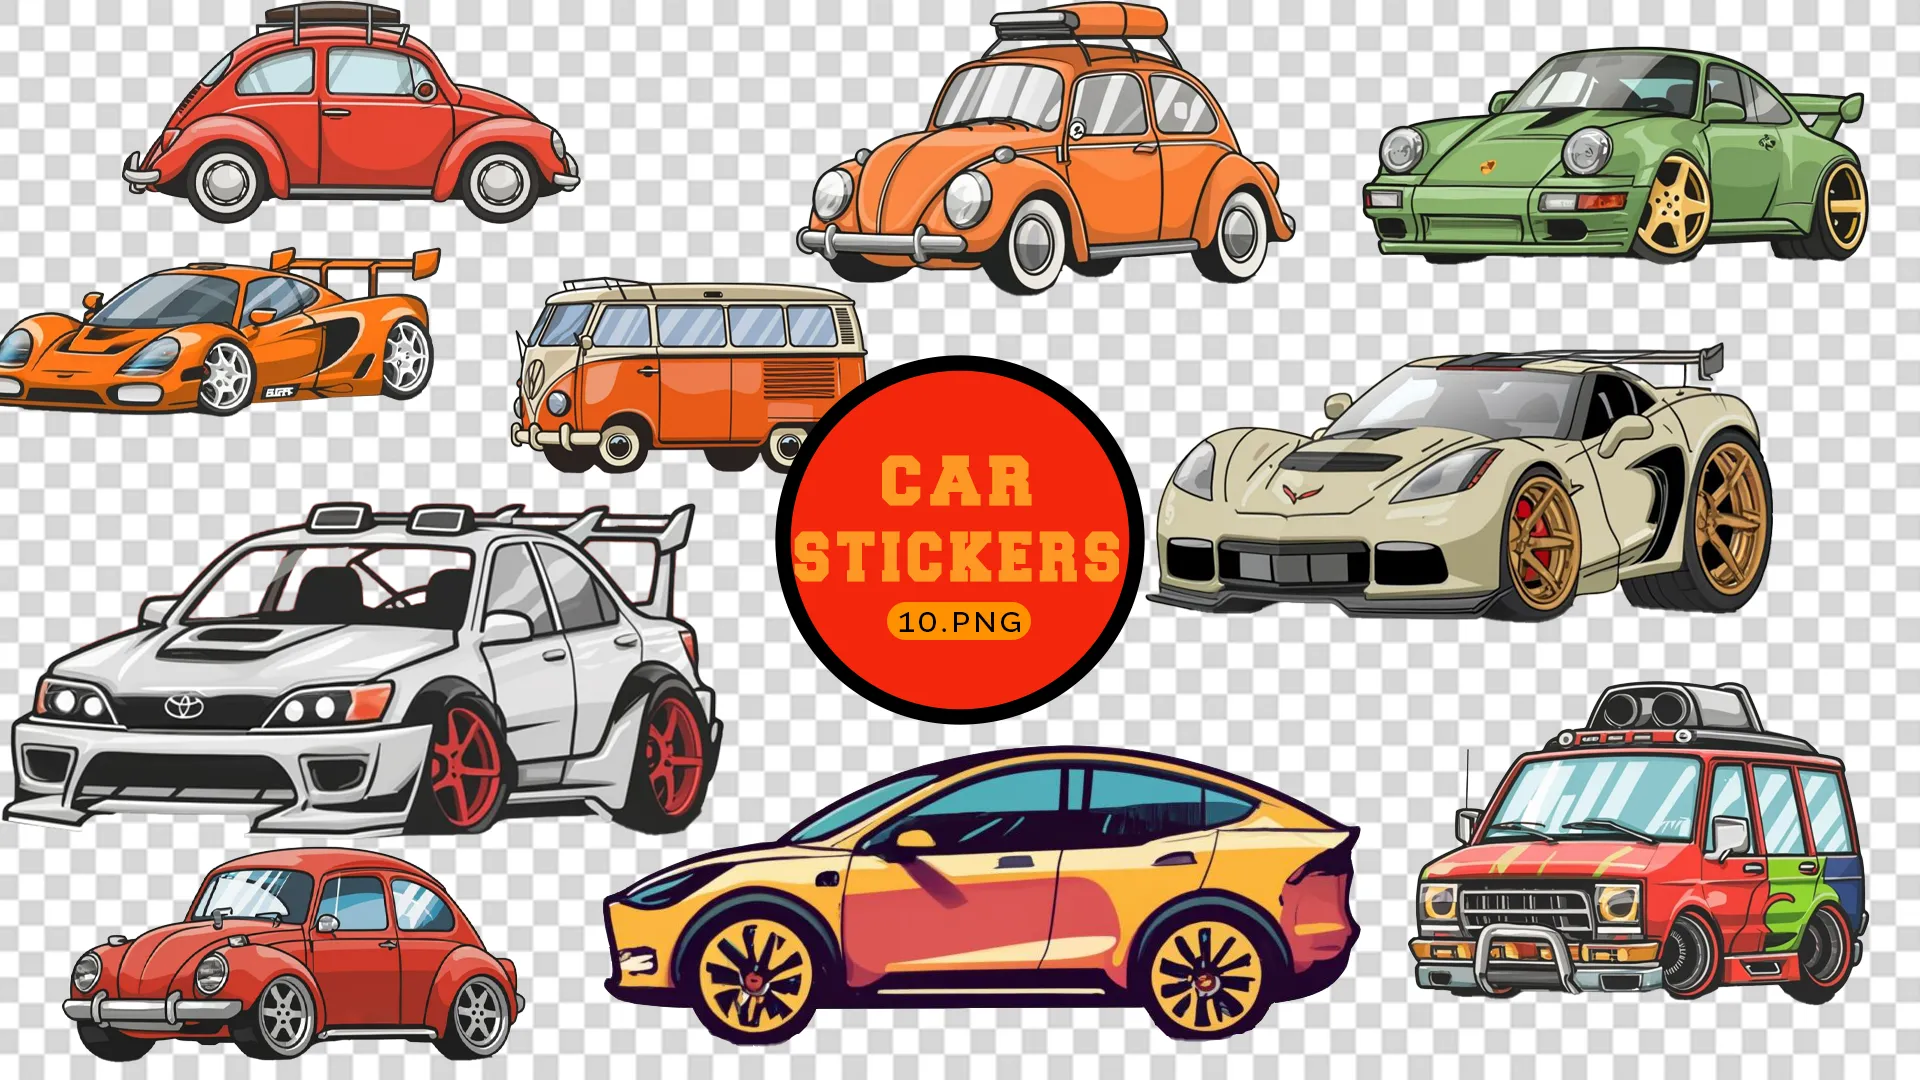 Classic Cruisers Car Stickers Collection image